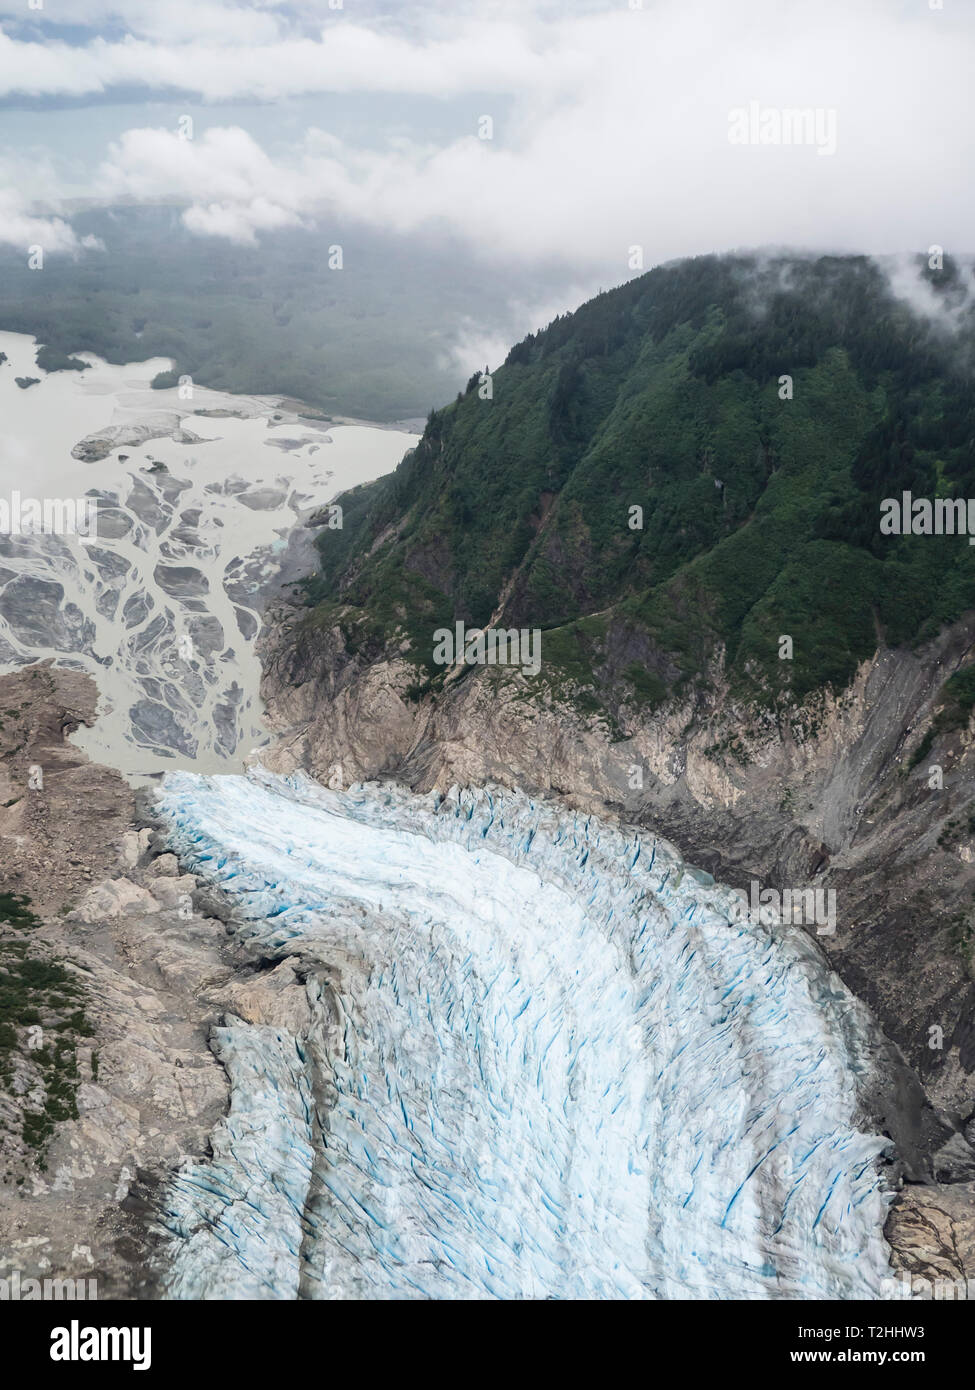 Aerial view of the Davidson Glacier, a valley glacier formed in the Chilkat Range near Haines, Alaska, United States of America Stock Photo